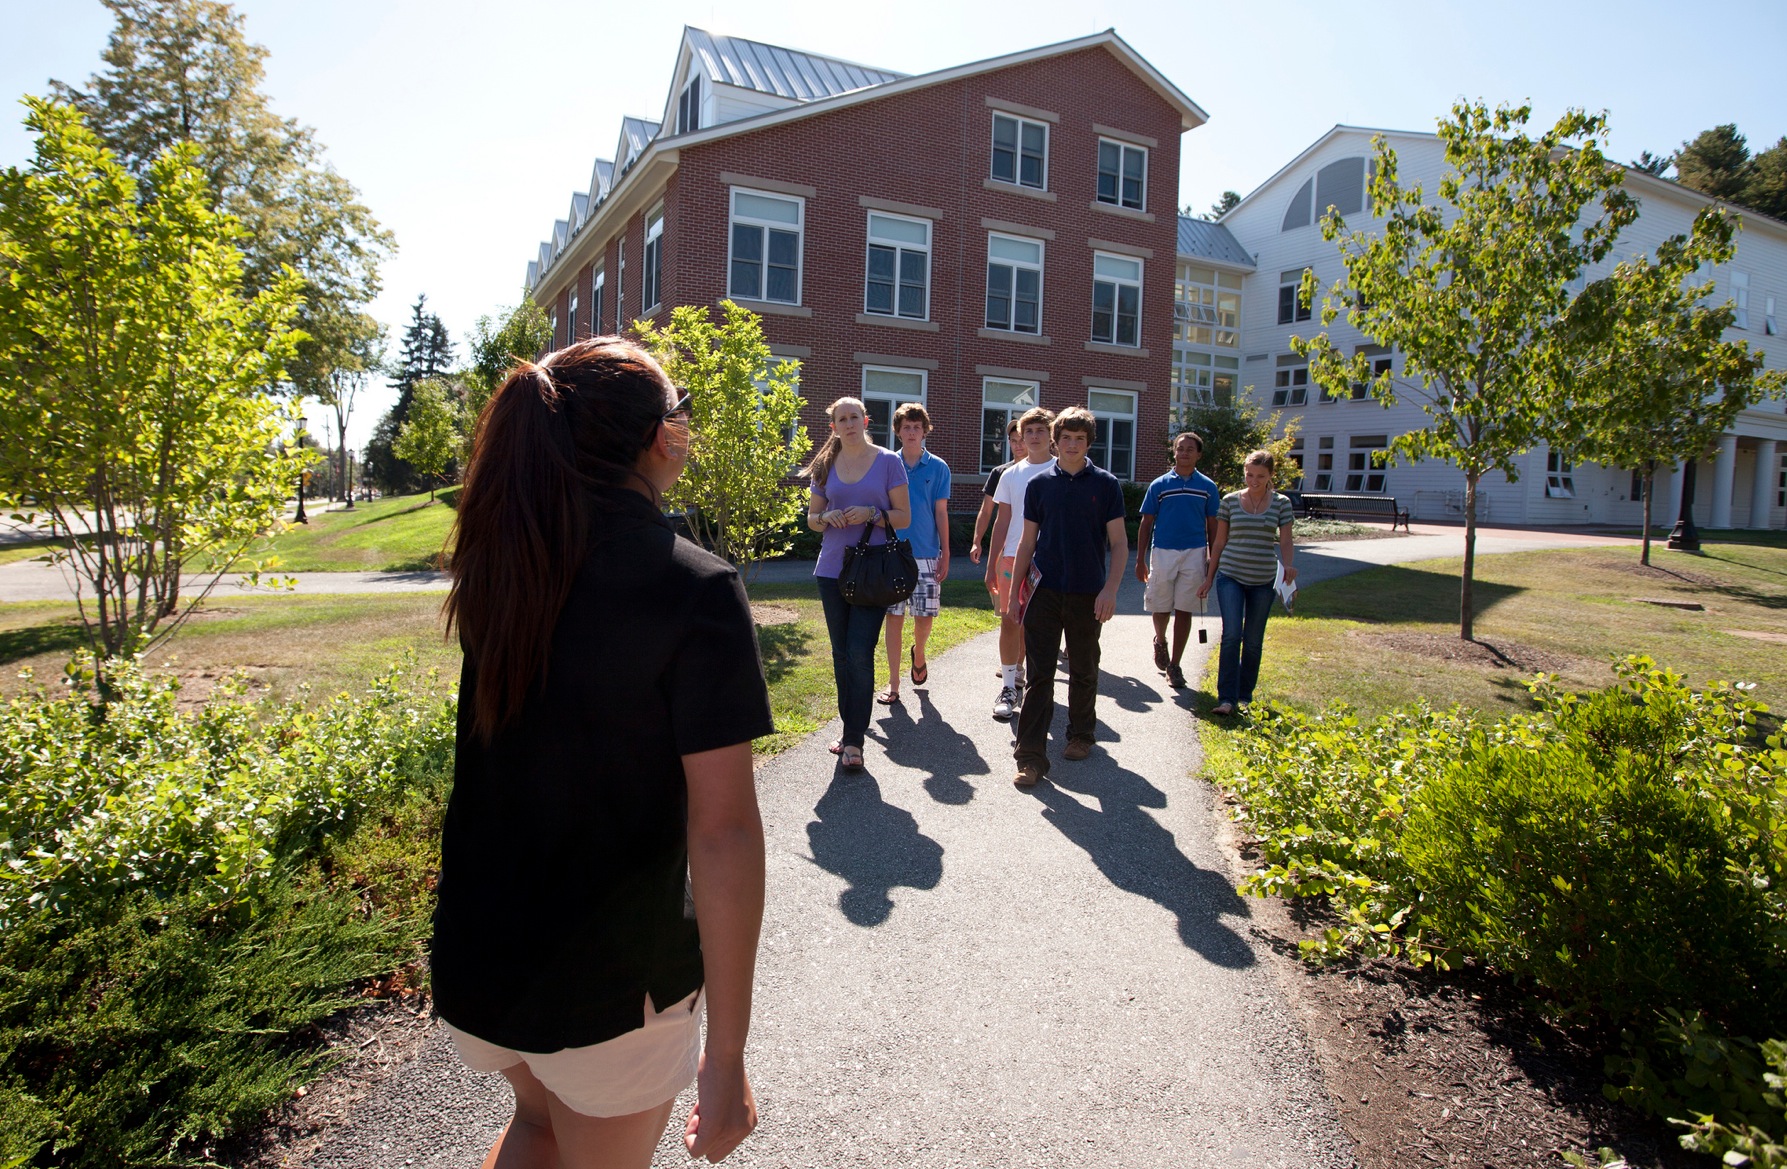 Janelle Lyford '13, admission tour guide, gives a midsummer tour of the Bates campus.